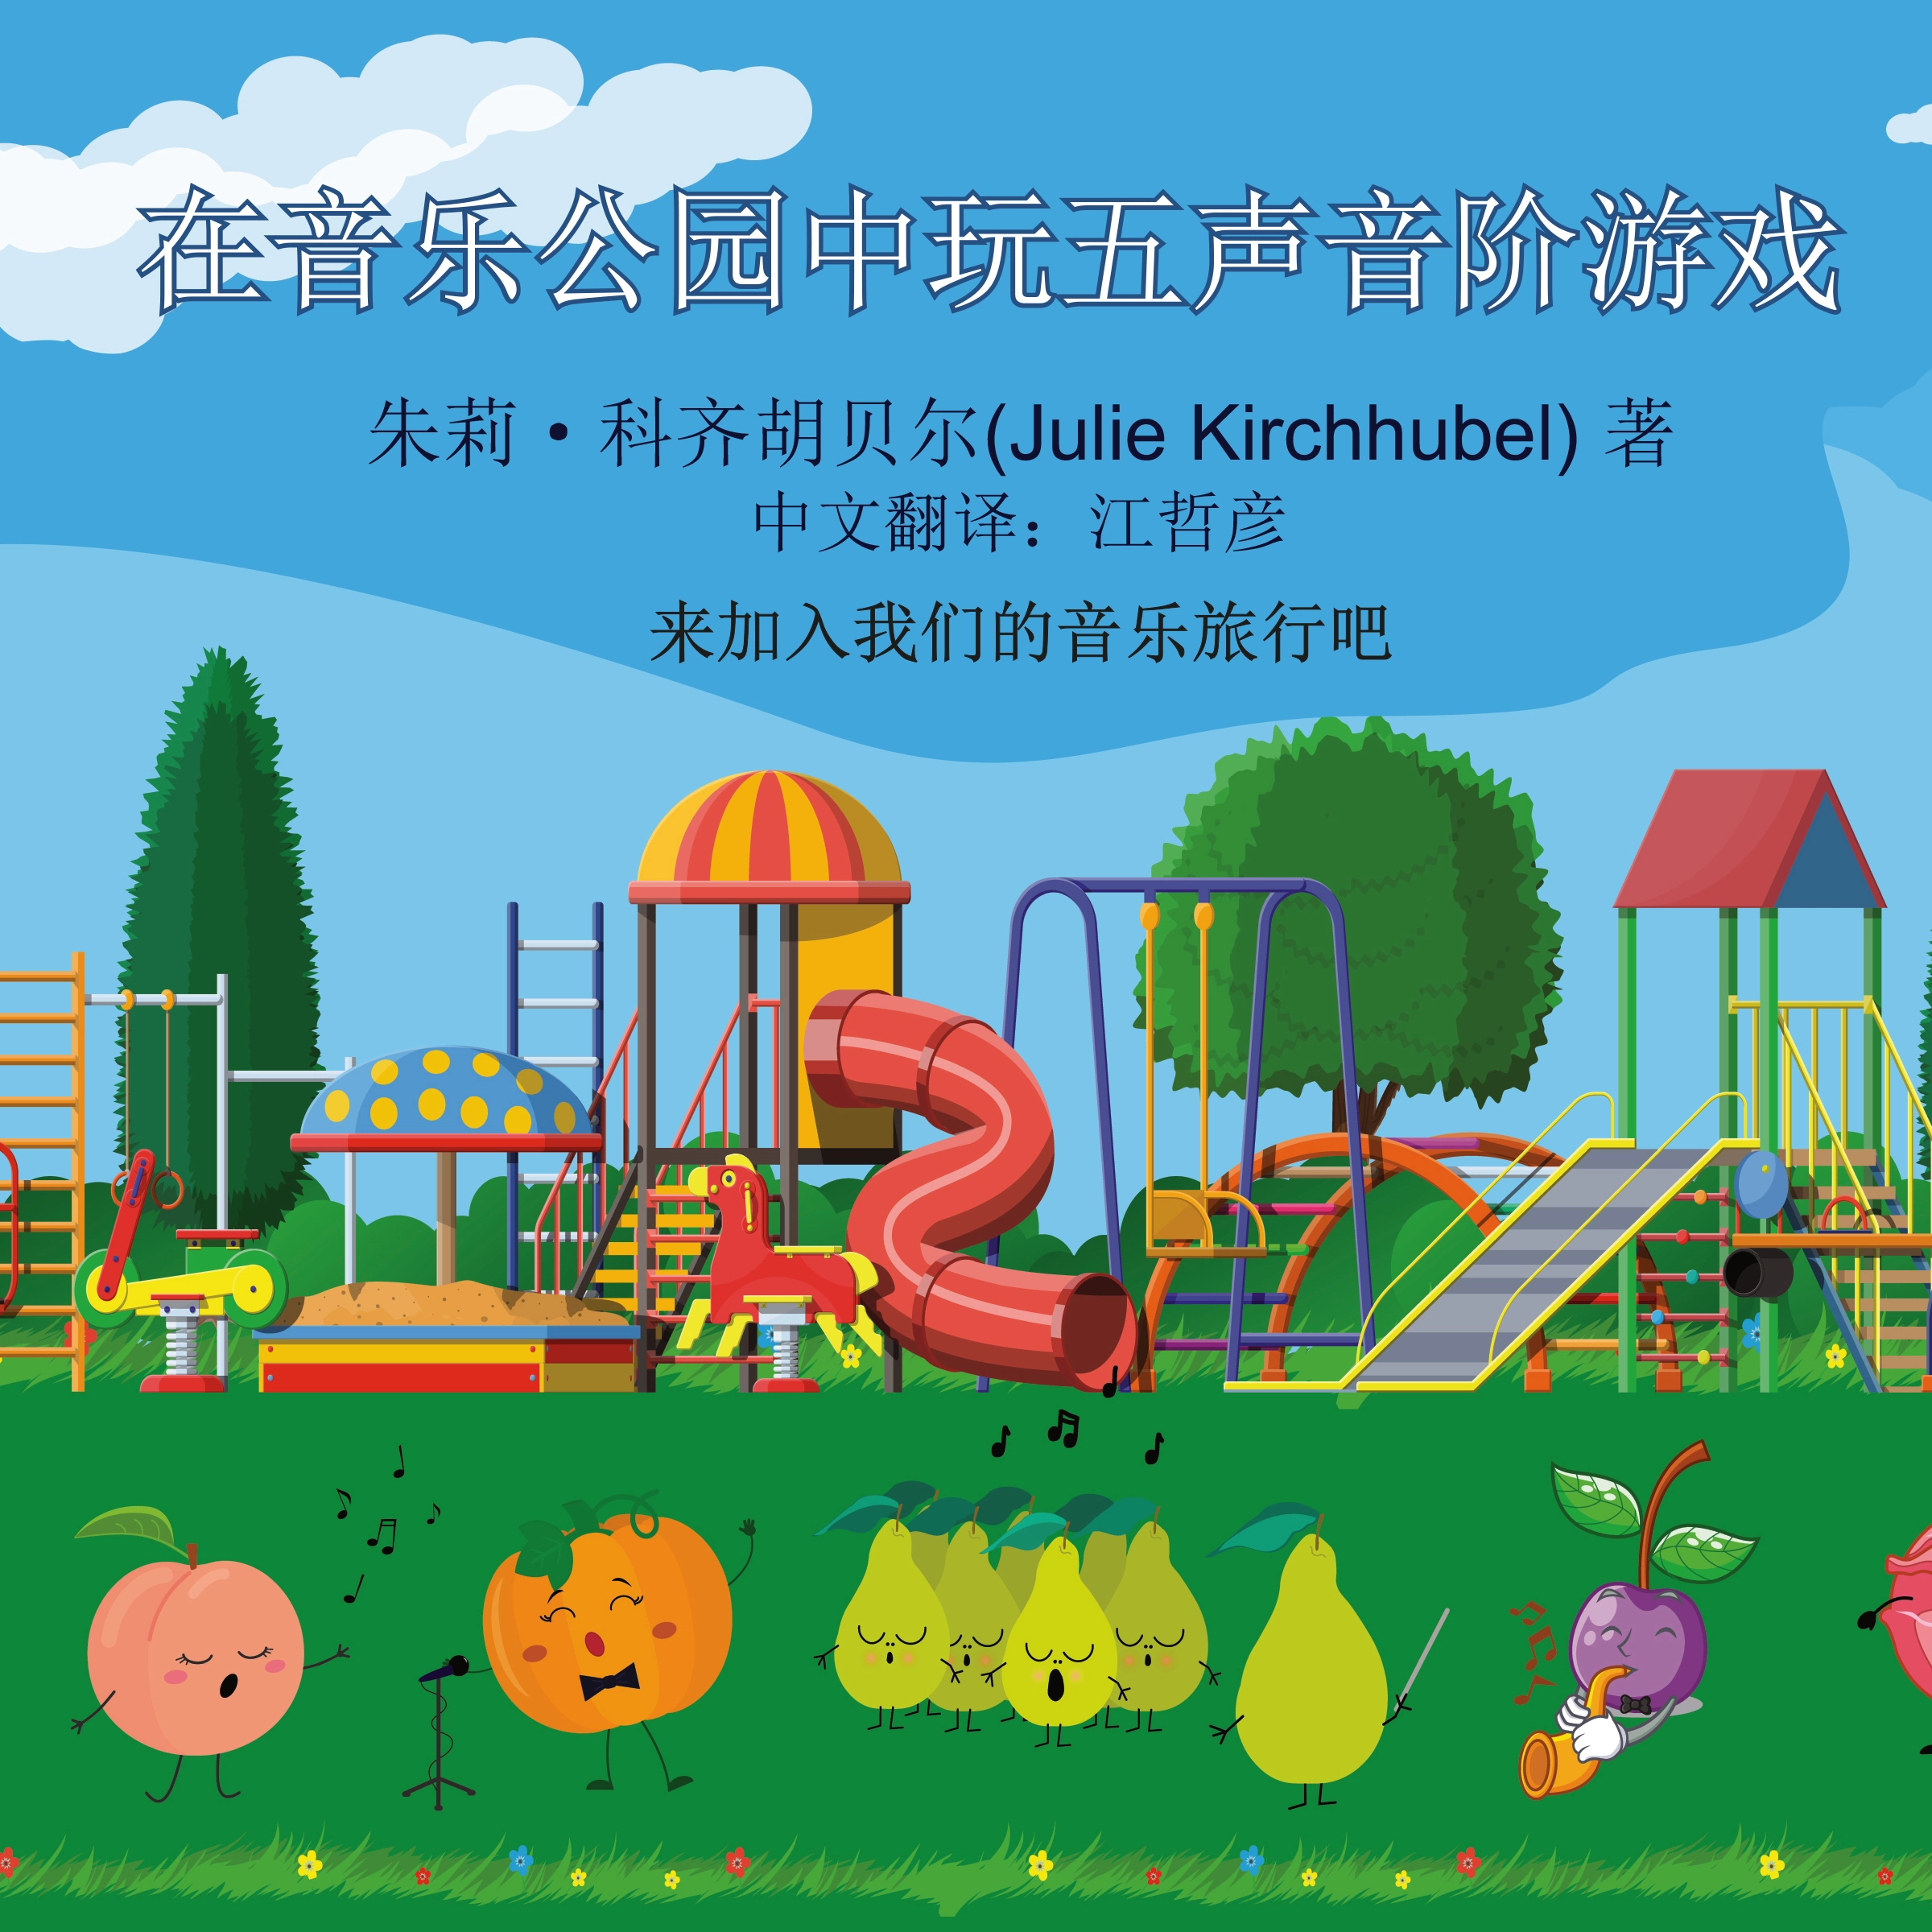 The Pentatonics Play At The Musical Park - Chinese Audiobook by Julie Kirchhubel